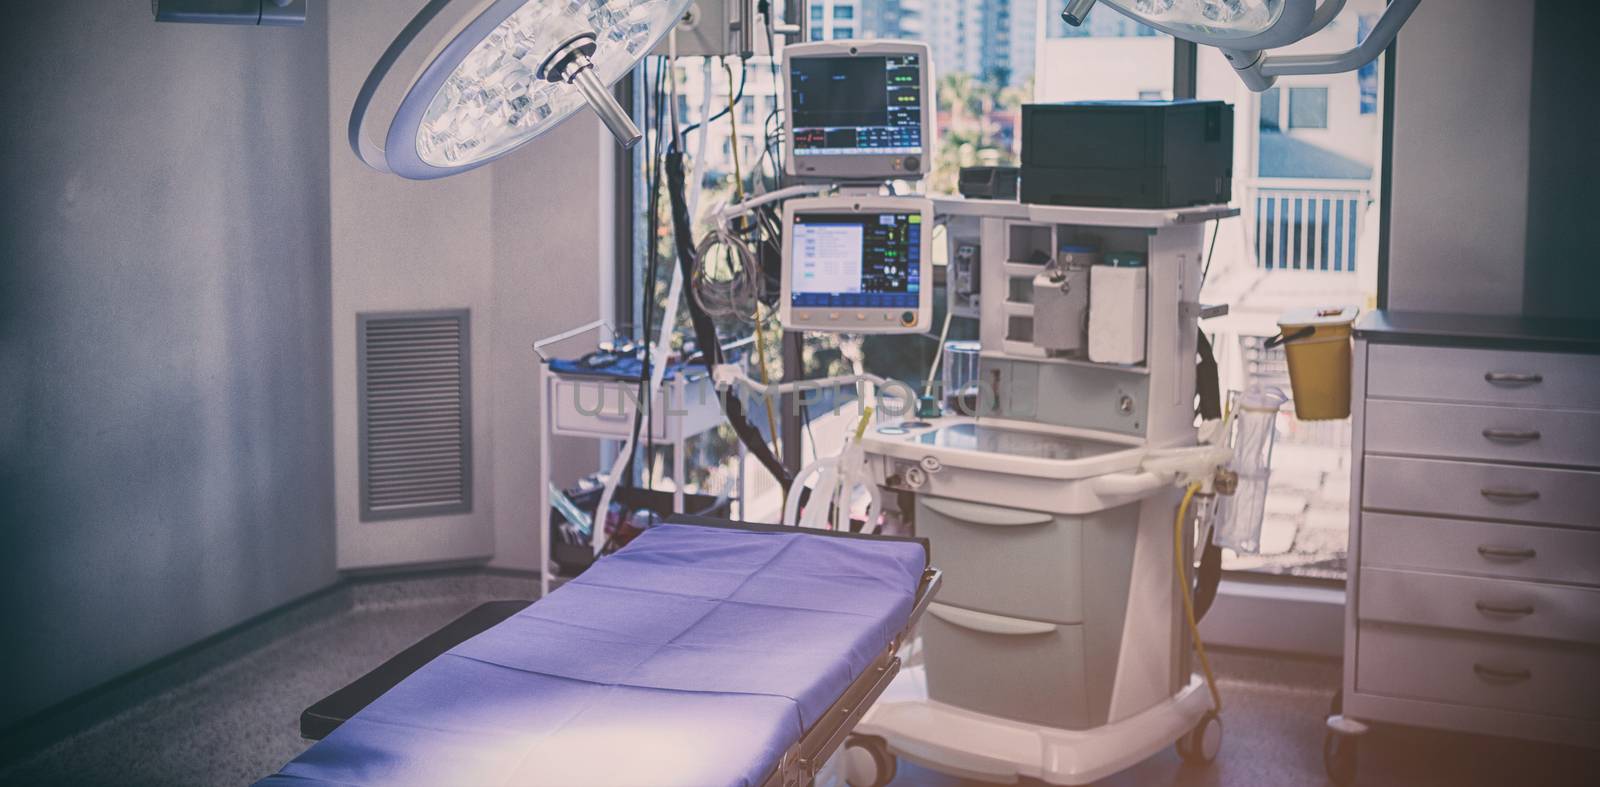 Equipment and medical devices in modern operating room at hospital